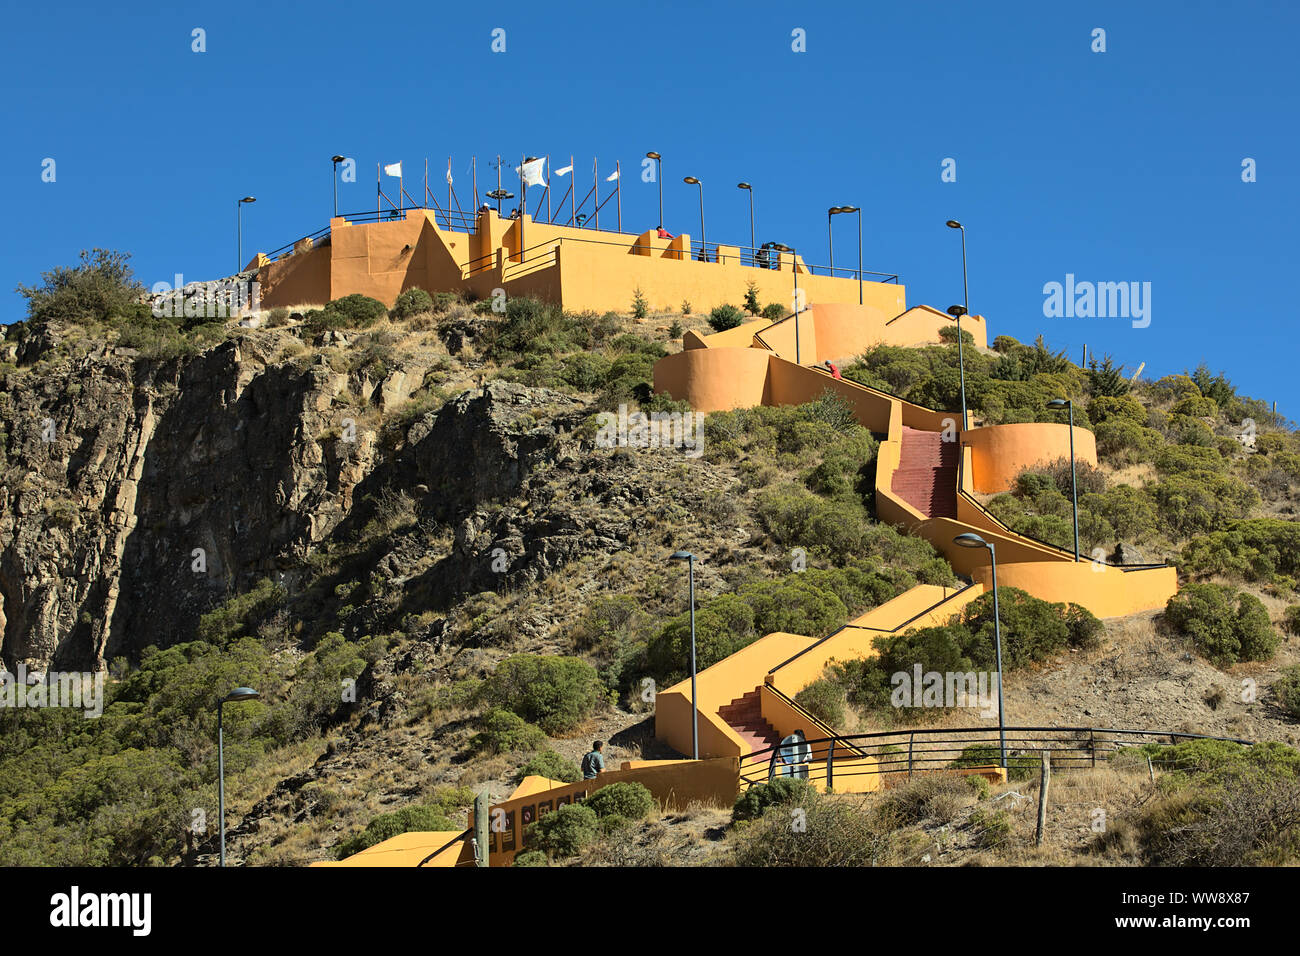 CHILE CHICO, CHILE - FEBRUARY 21, 2016: Plaza del Viento (Square of the Wind) scenic viewpoint and the stairs leading up to it in Chile Chico, Chile Stock Photo